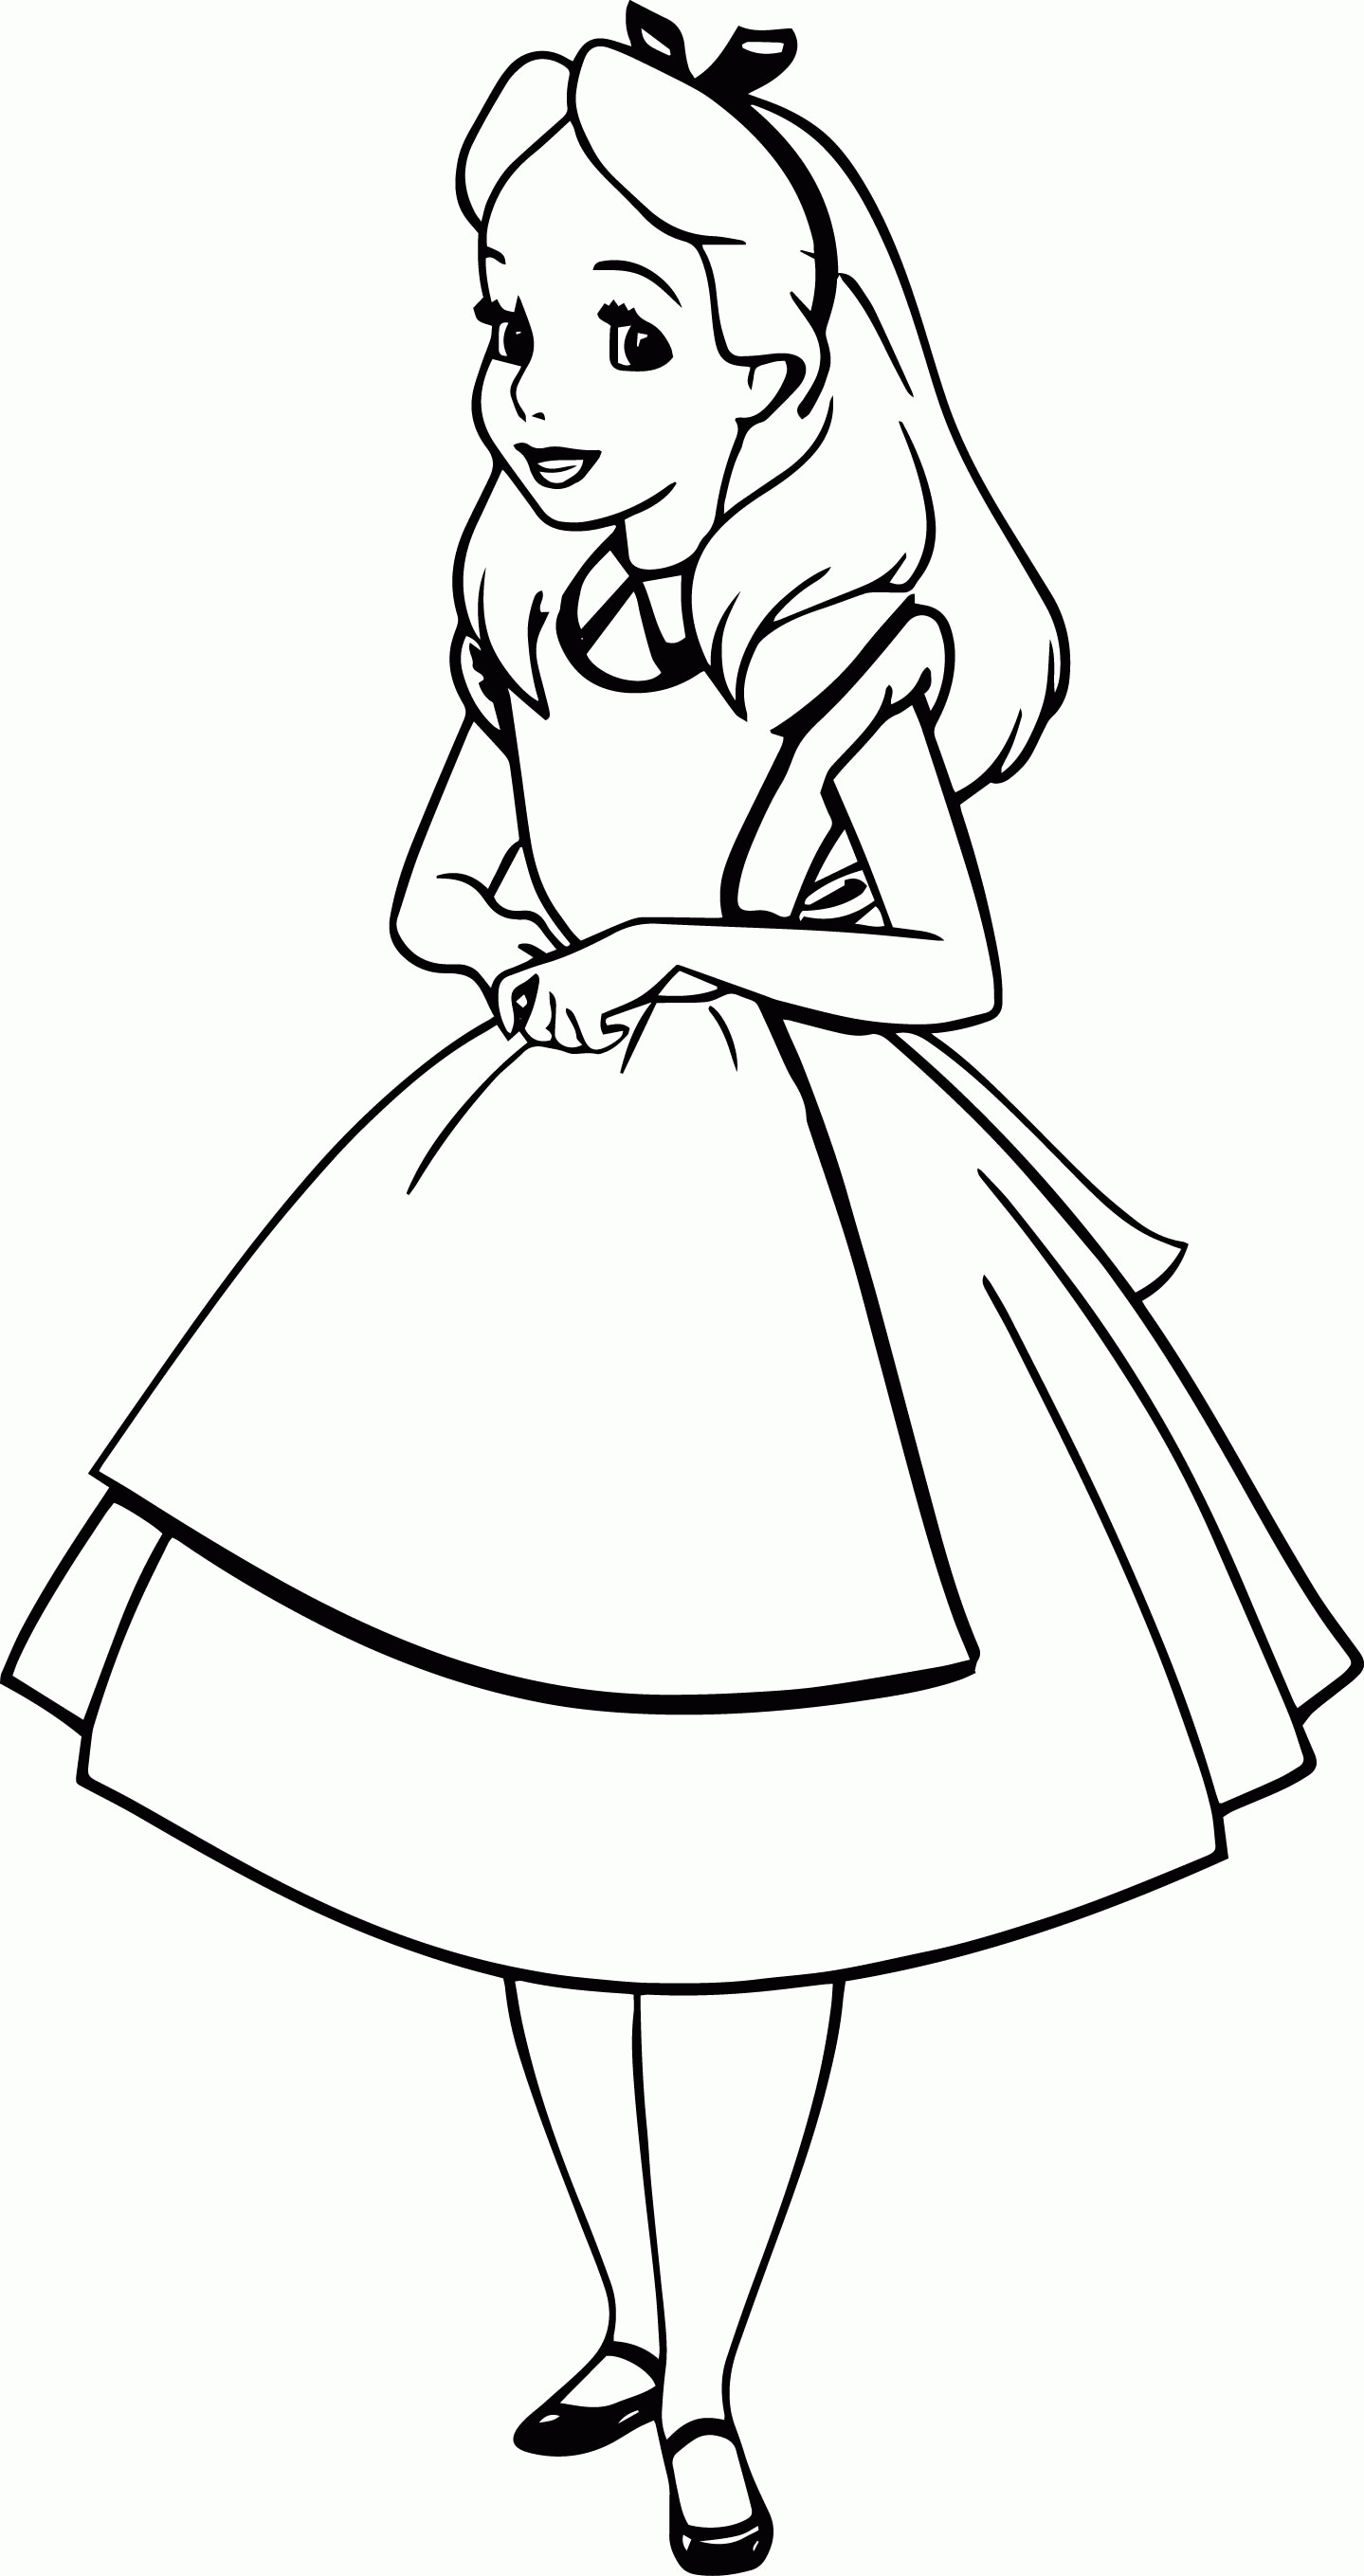 Alice In Wonderland Coloring Page 01 | 